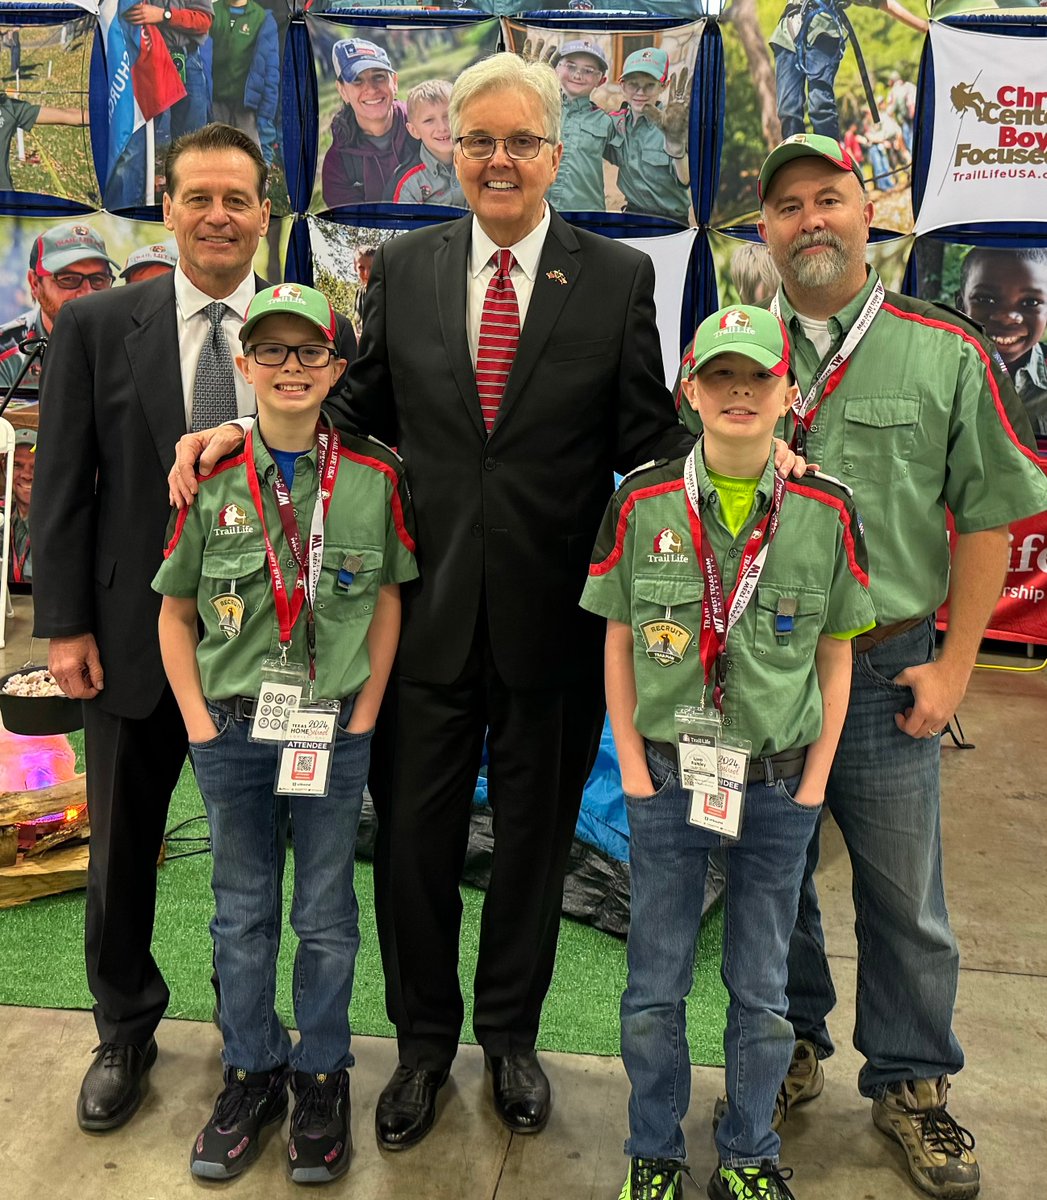 At the @thsc Home School Convention with Brent Hagenbuch. President Trump, Gov. Abbott, Sid Miller, Senators Bob Hall, Phil King, Tan Parker, and many others support Brent for our open Senate seat in SD 30. Current Senator Drew Springer retired and is supporting Brent as well.